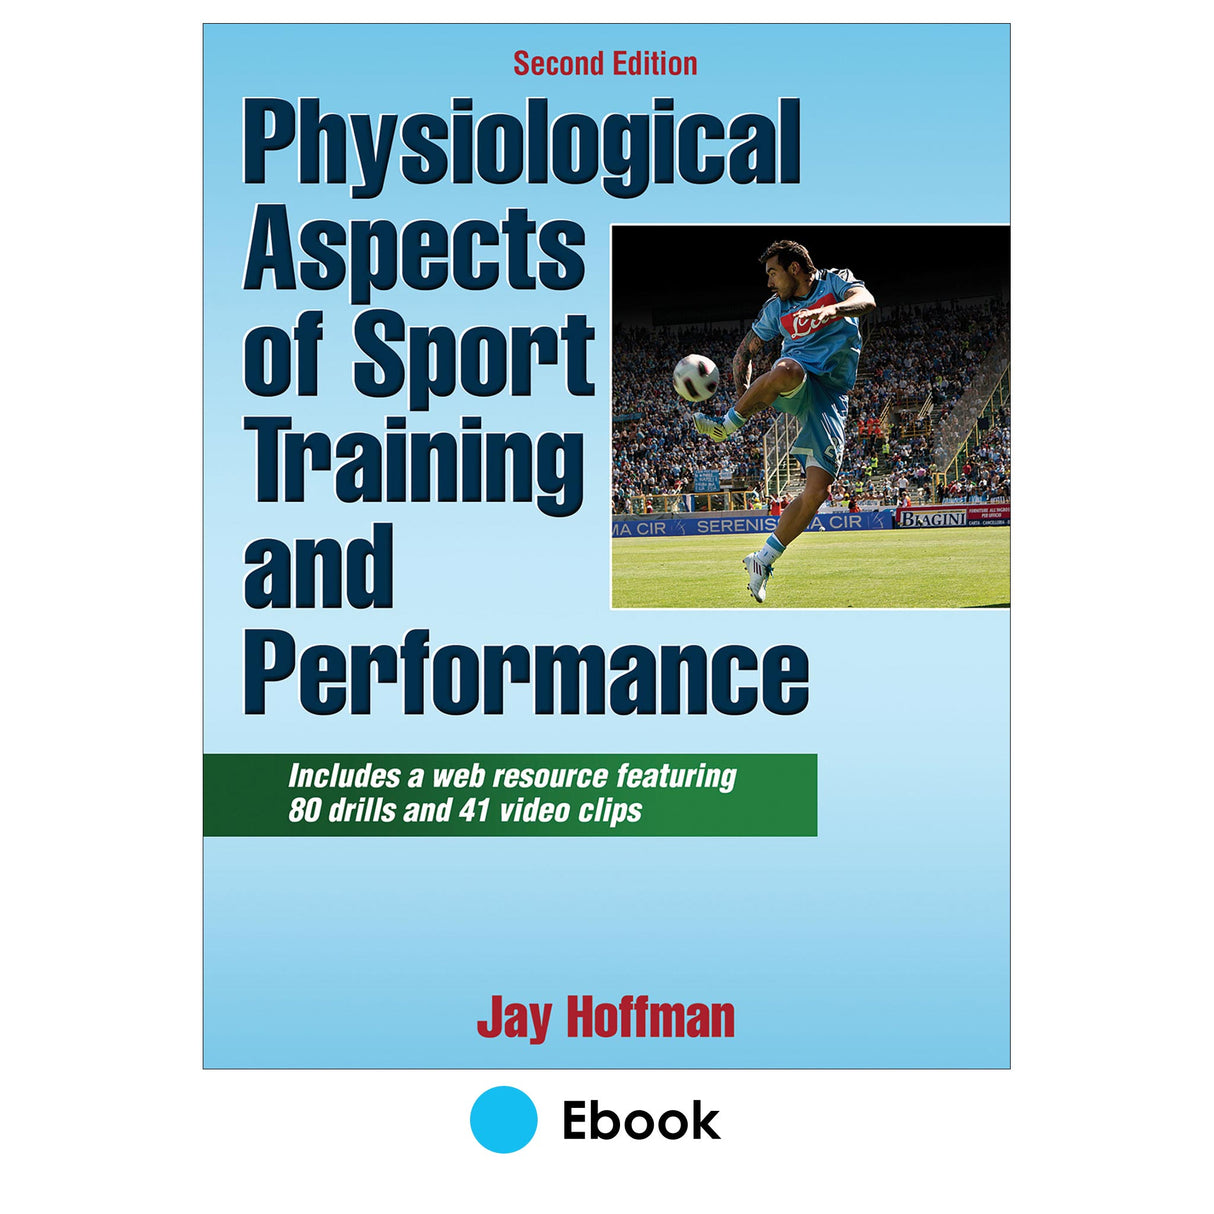 Physiological Aspects of Sport Training and Performance 2nd Edition PDF With Web Resource